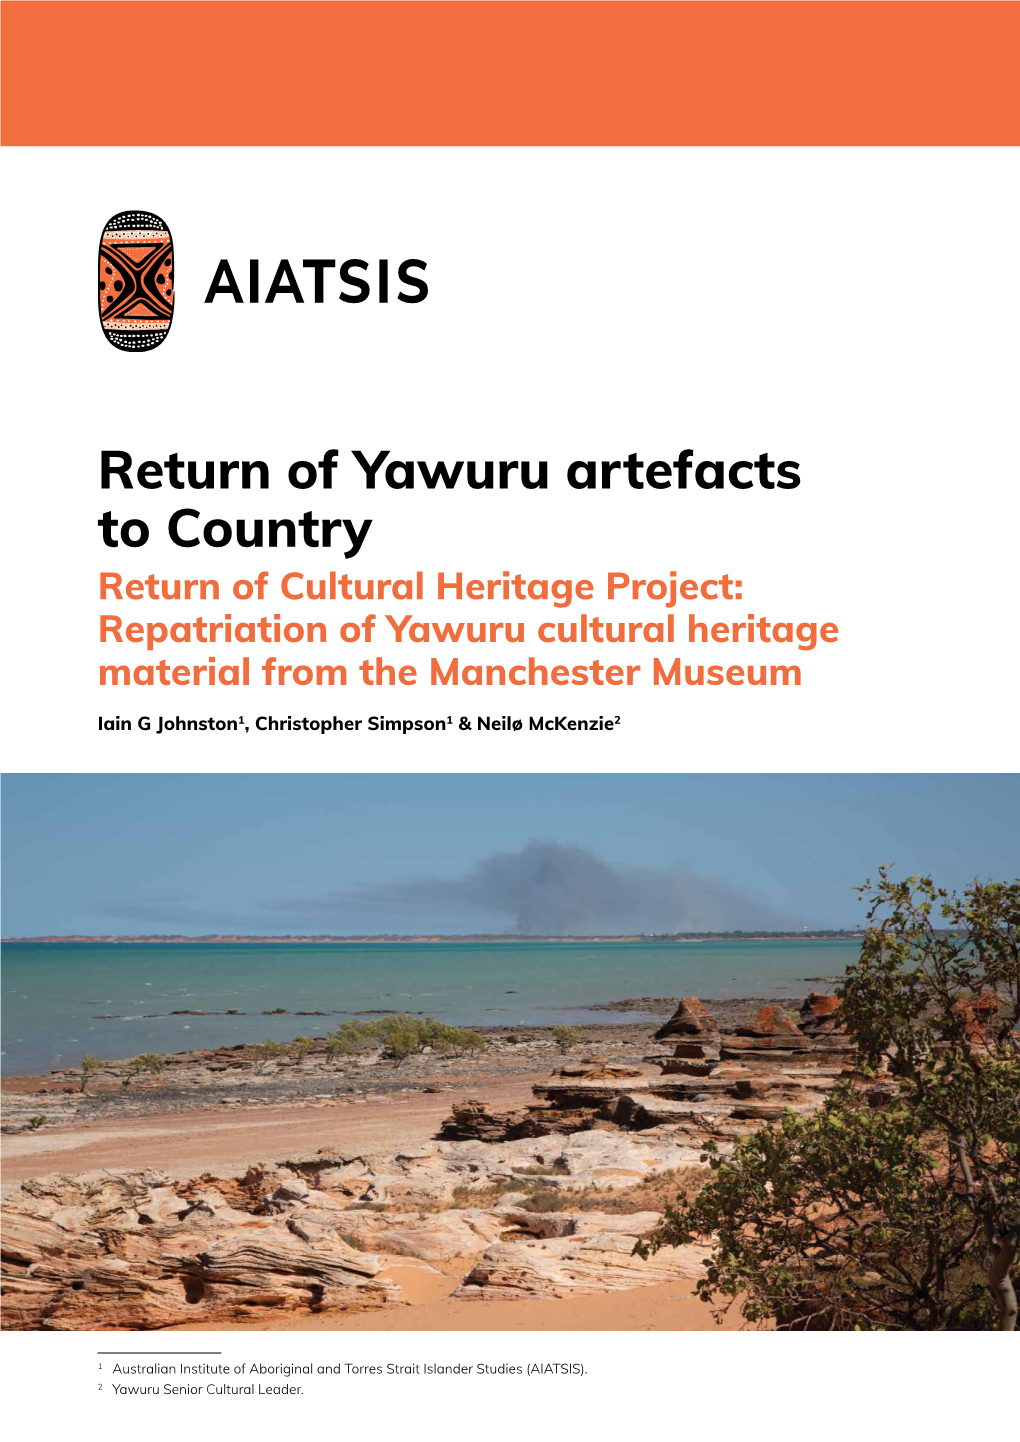 Return of Yawuru Artefacts to Country Return of Cultural Heritage Project: Repatriation of Yawuru Cultural Heritage Material from the Manchester Museum